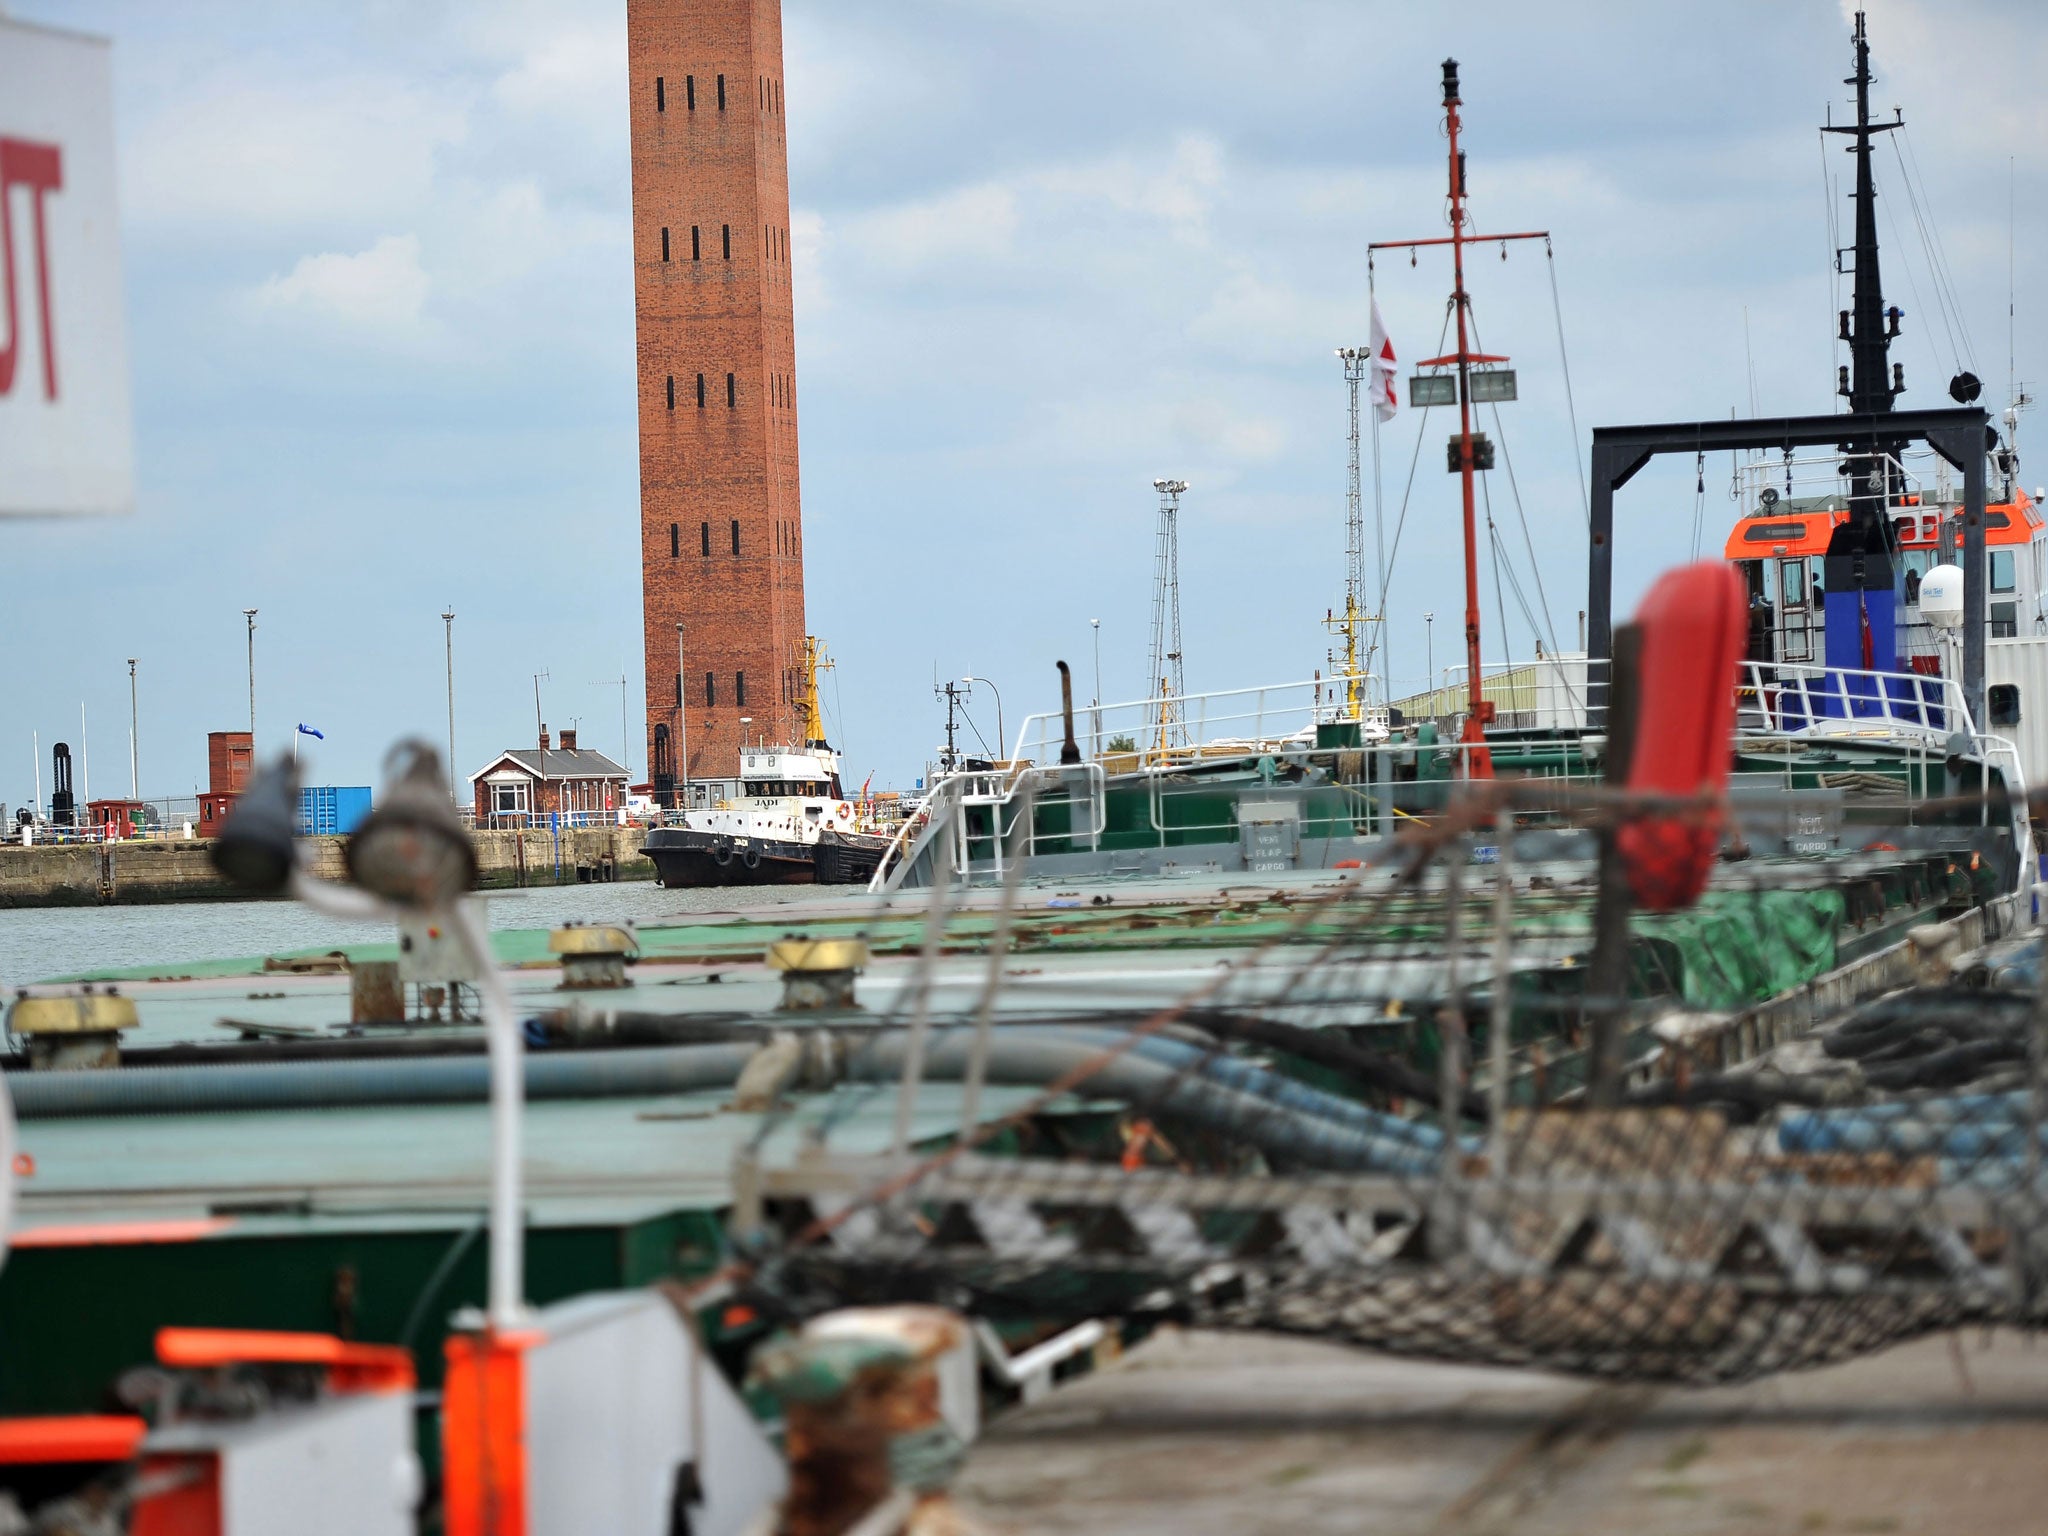 The Royal Docks at Grimsby; residents in Grimsby are rising up against Channel 4's attempts to cast them as the subjects of its next documentary series on the poor